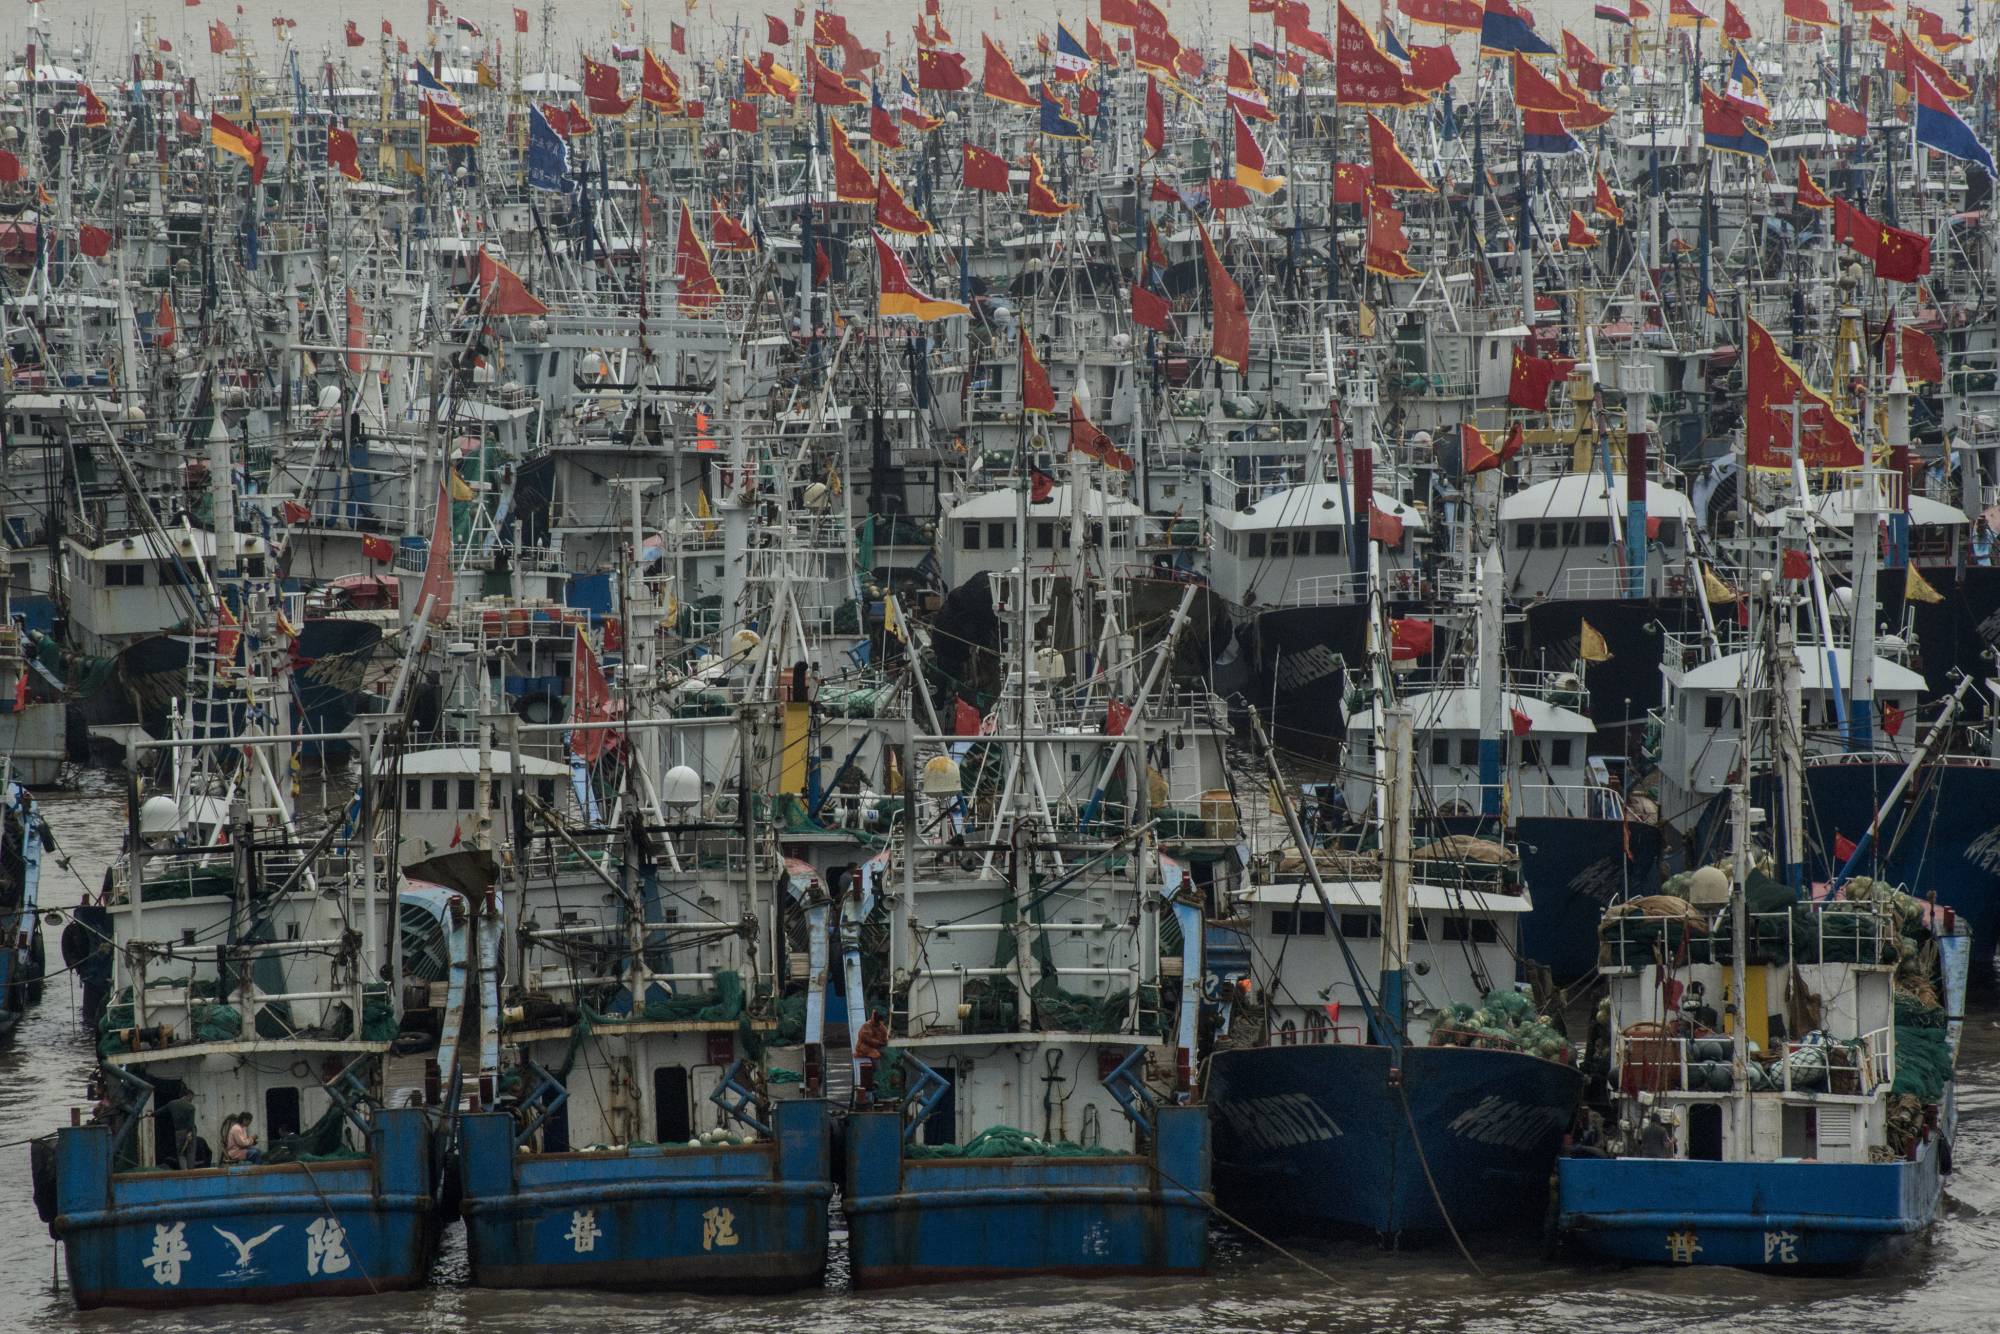 Fishing boats in Zhoushan, China's largest fishery, in September 2015. With its own coastal waters depleted, China has built a global fishing operation unmatched by any other country. | GILLES SABRIE / THE NEW YORK TIMES